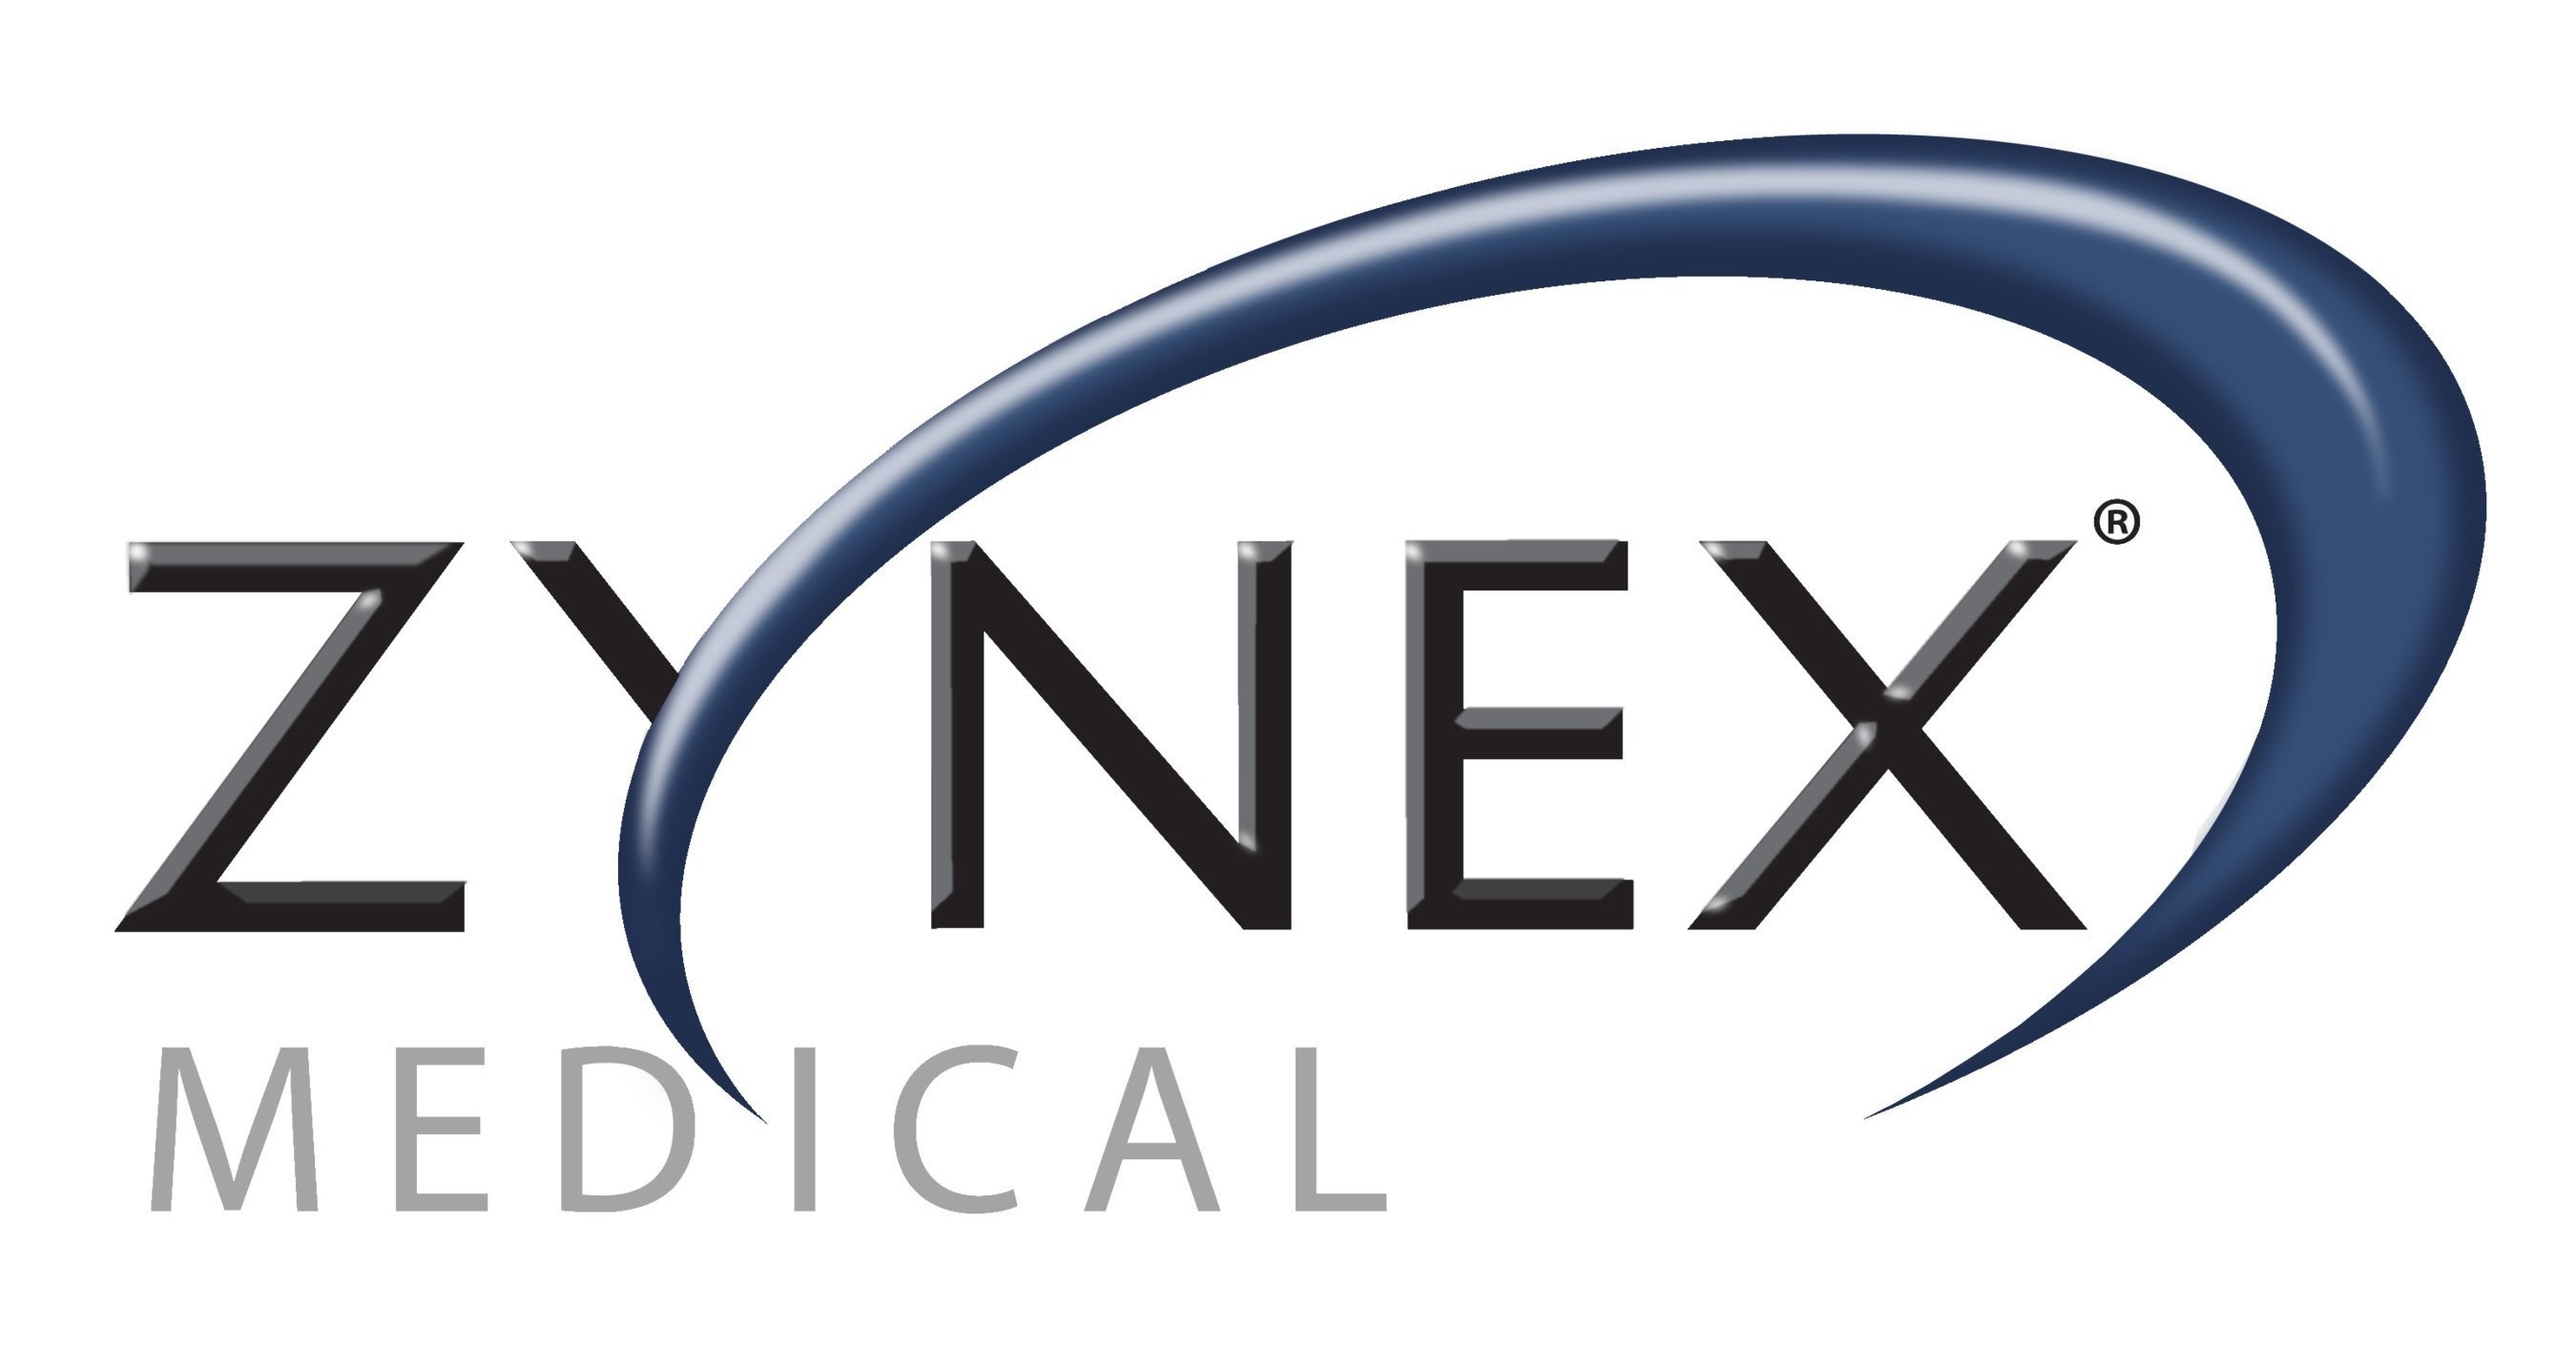 Zynex Executives Named Among Top 25 Leaders in Medical Technology Industry